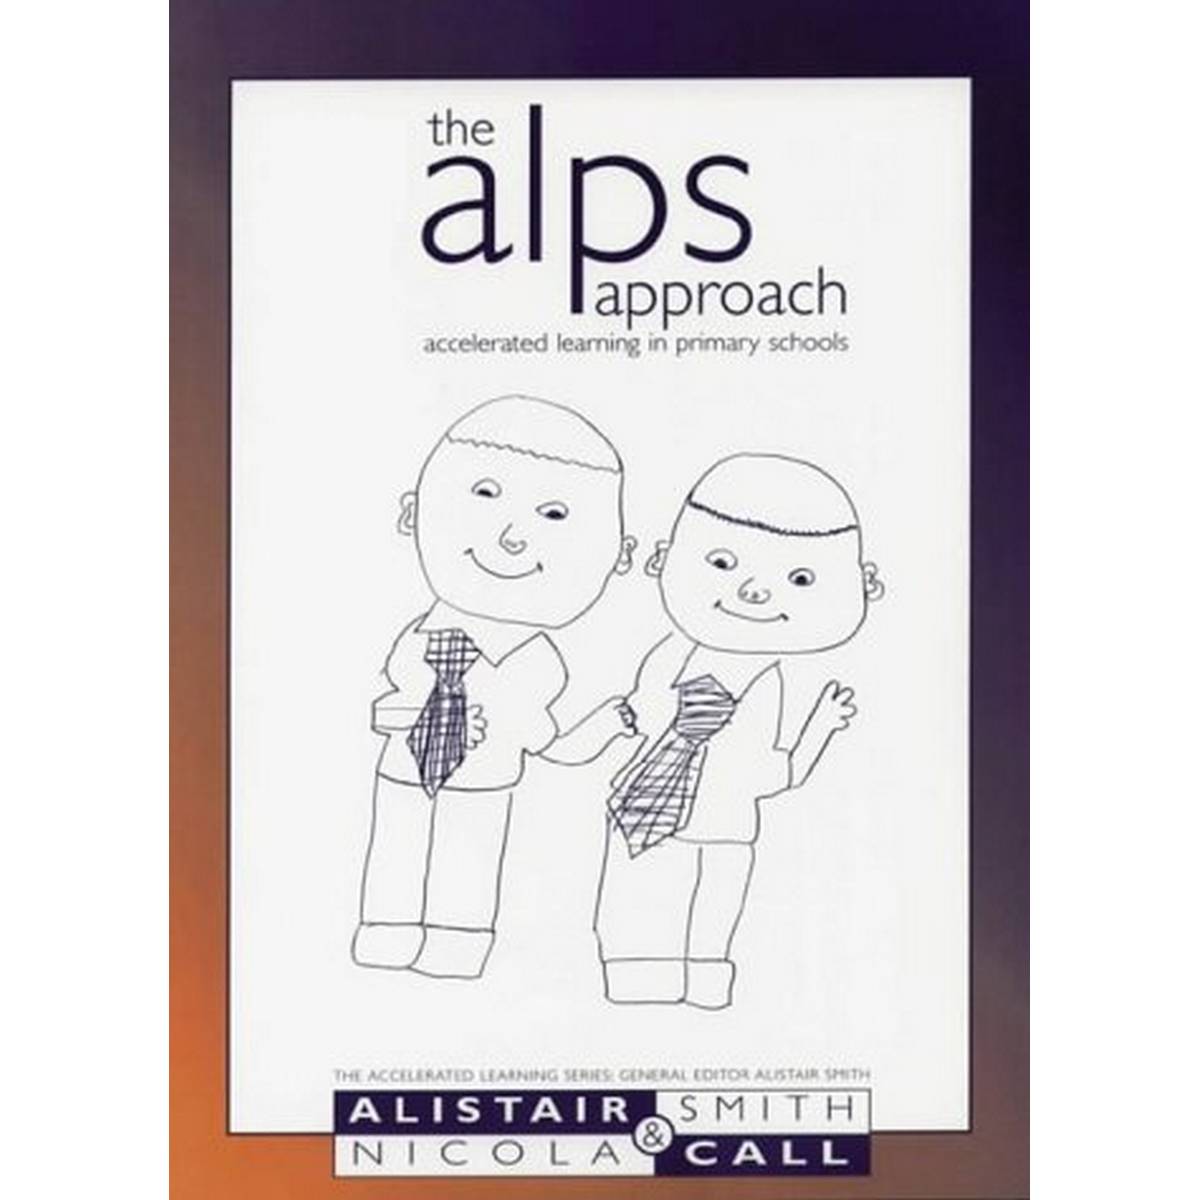 ALPS ApproachÃ¢Â€Â”Accelerated Learning in Primary Schools, The